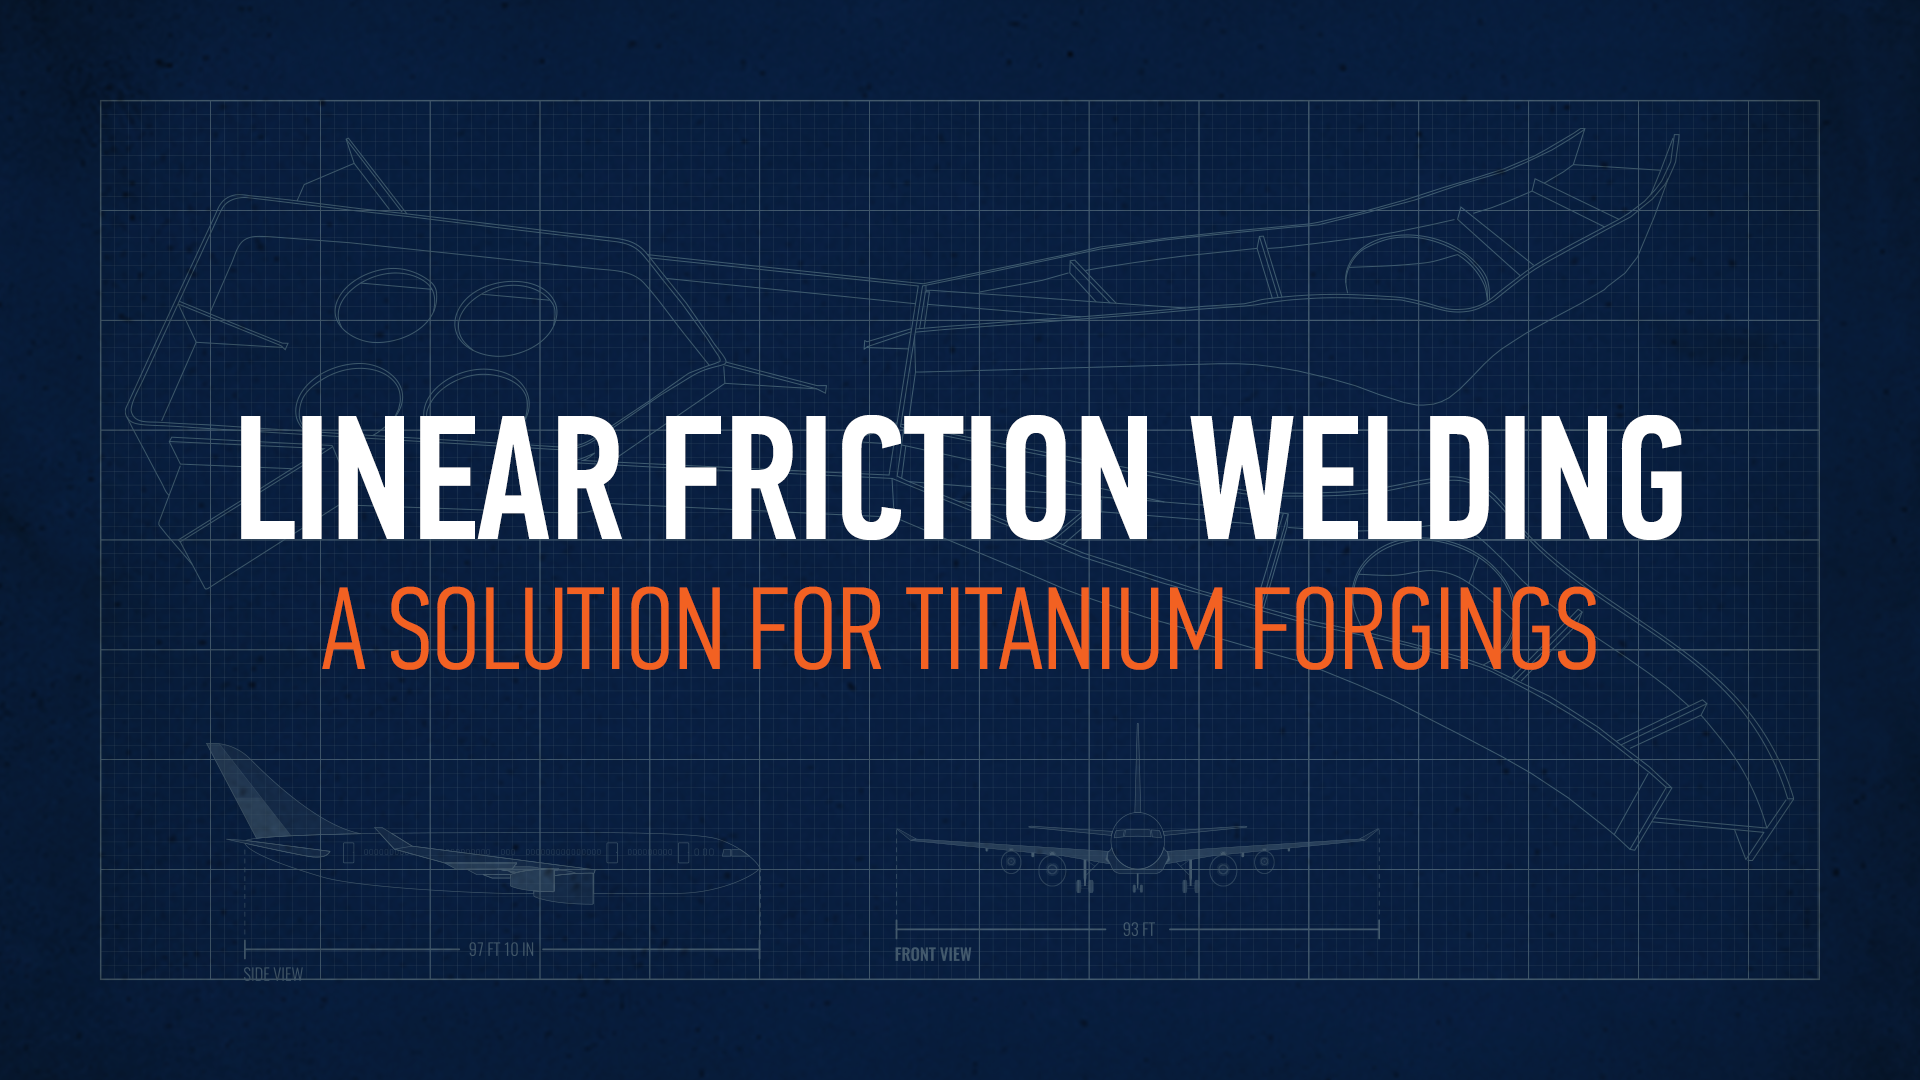 Linear Friction Welding: A Solution for Titanium Forgings